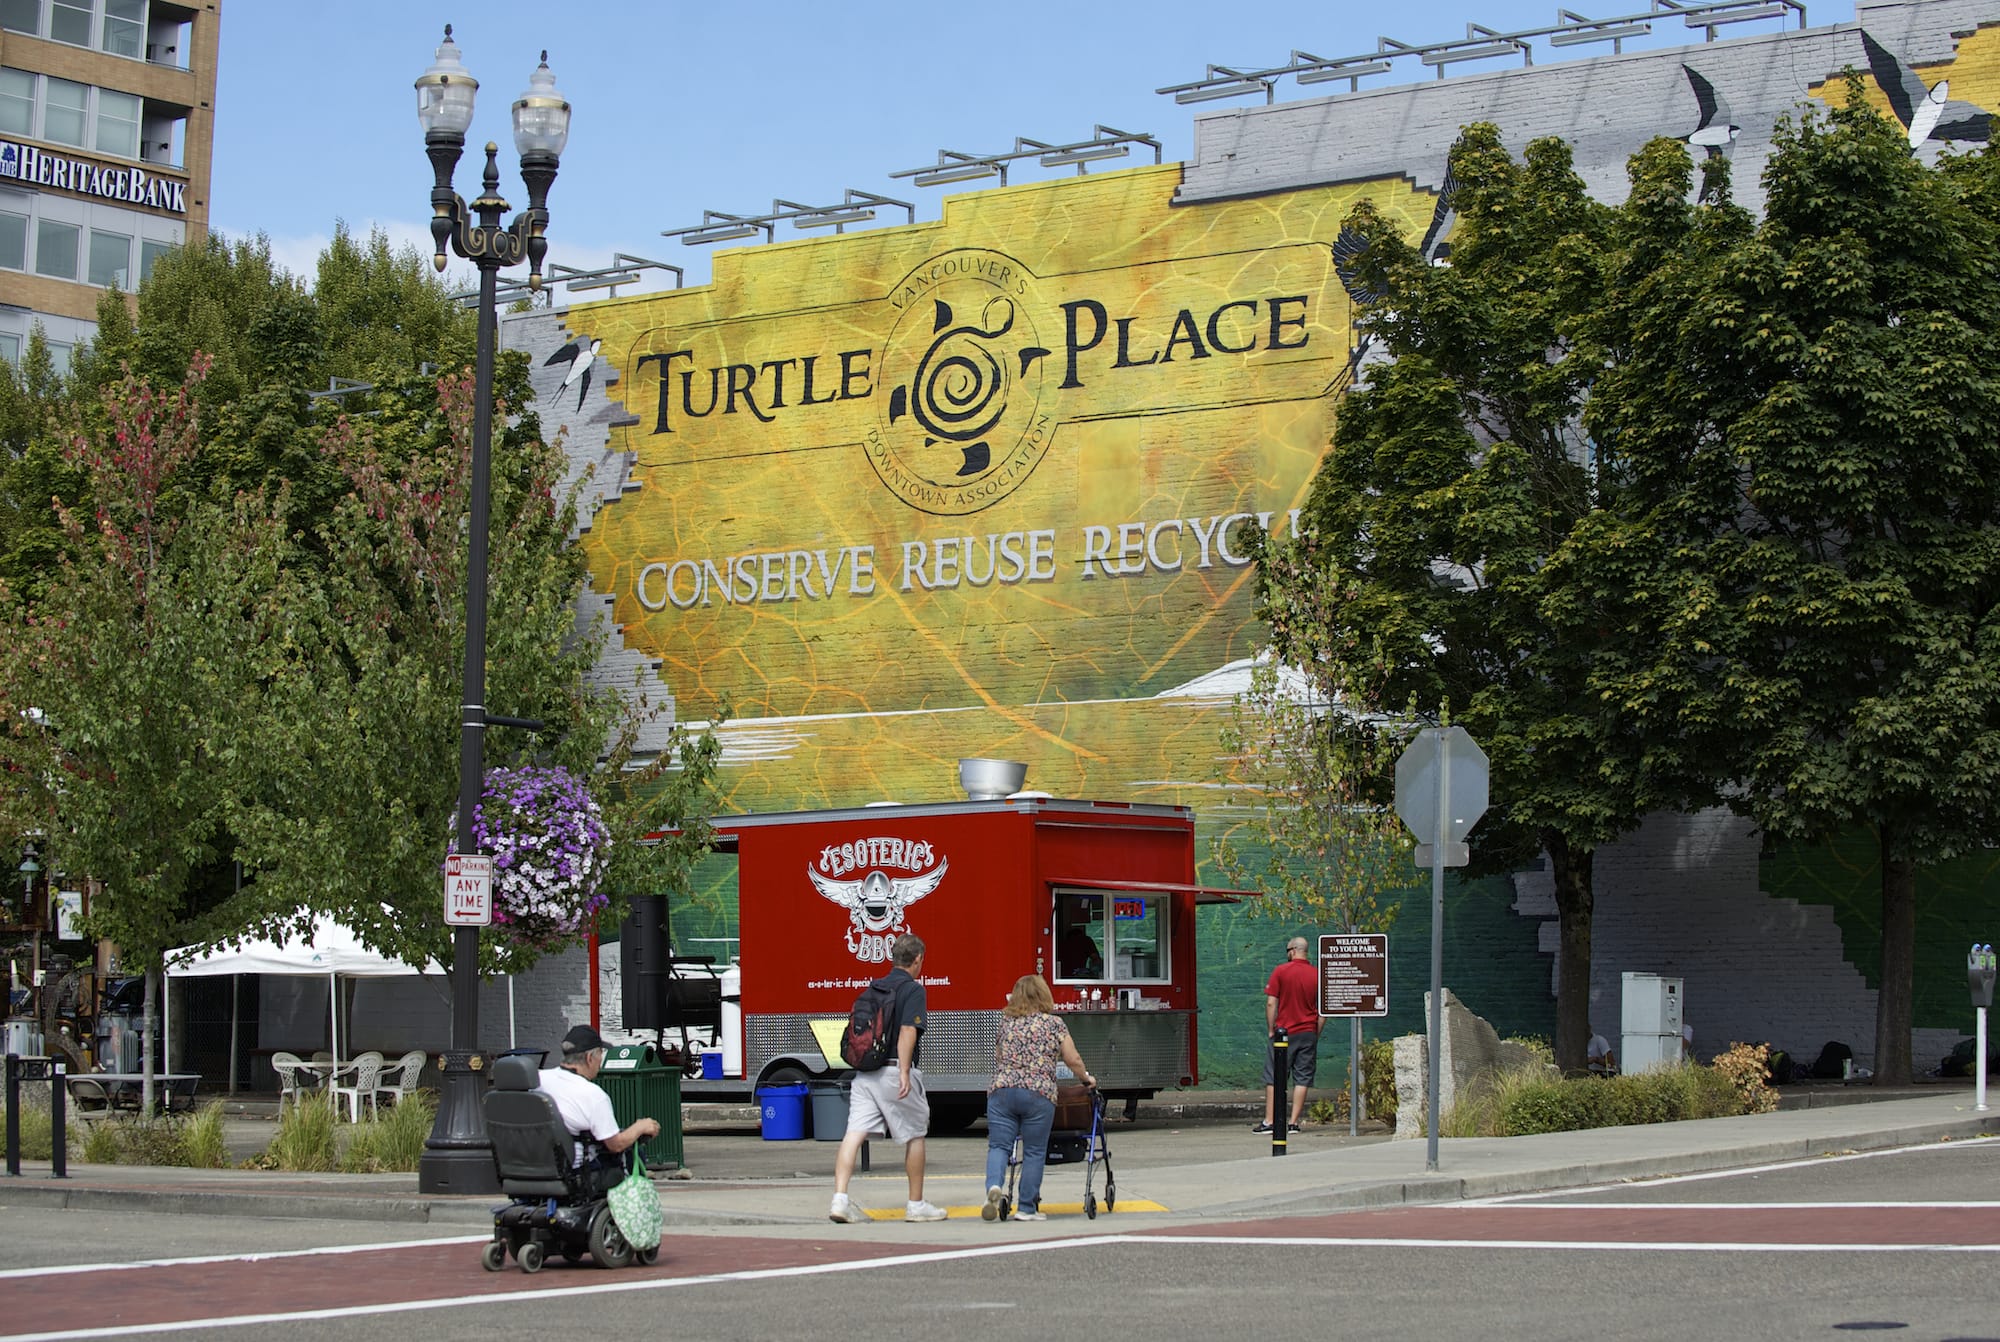 Food trucks, including Esoteric BBQ, have set up in Turtle Place plaza this summer as part of a pilot program to revitalize the underused public space.